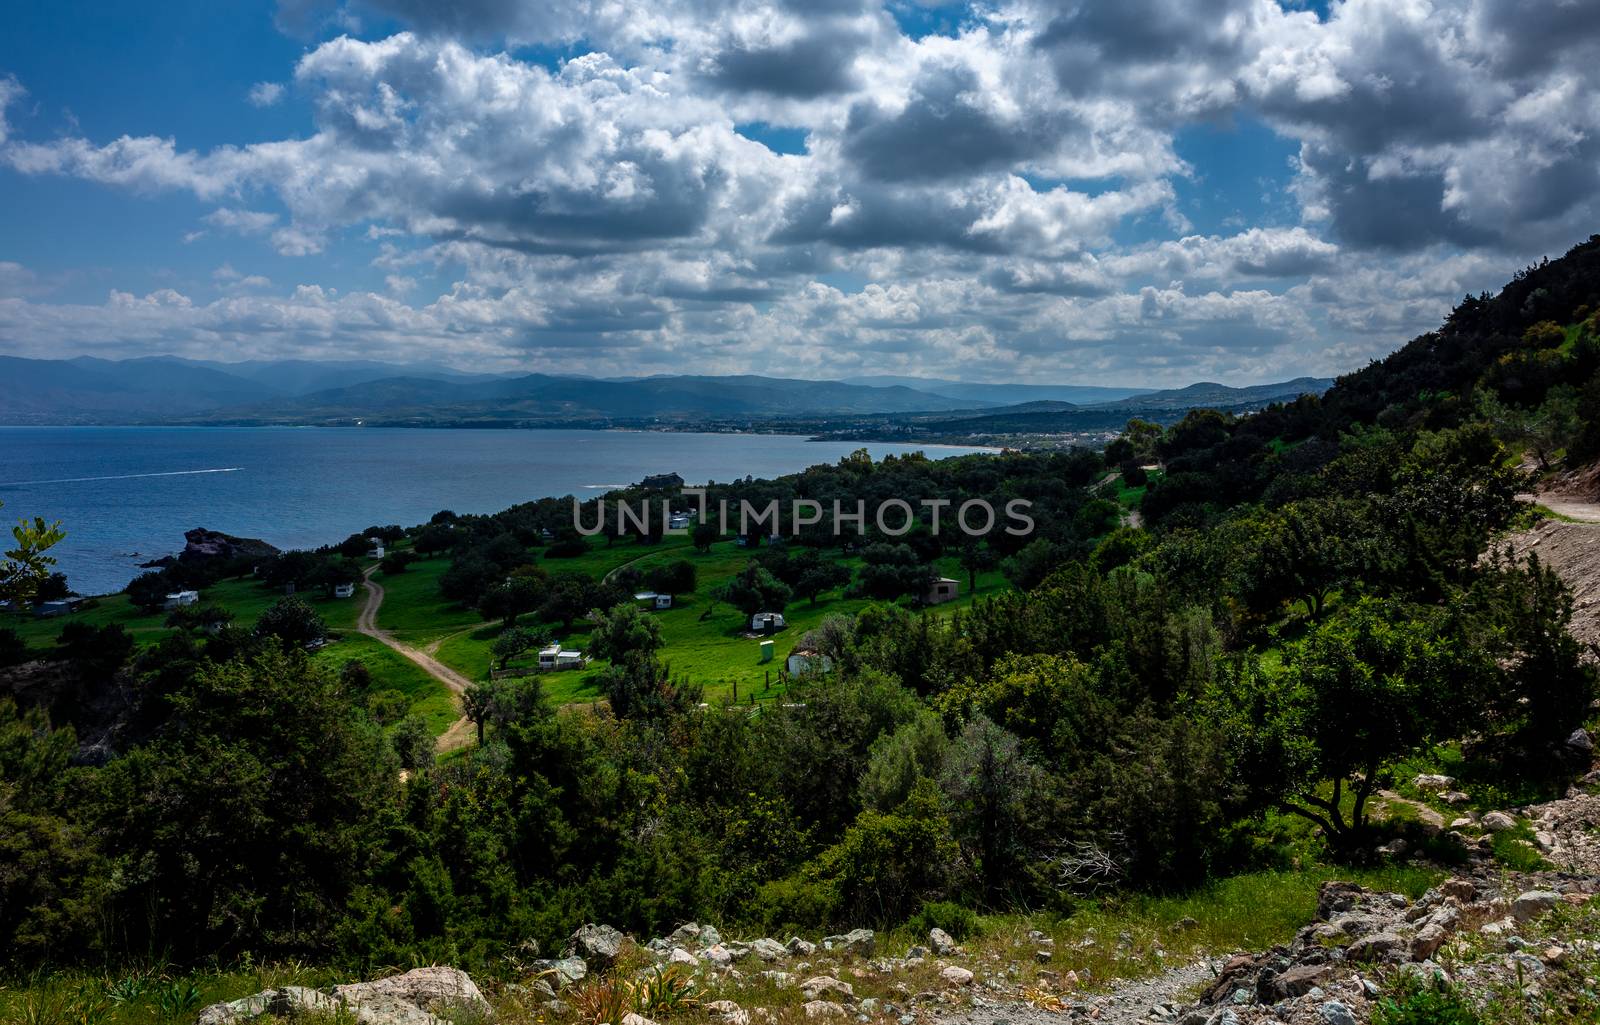 Landscapes of the island of Cyprus by fifg